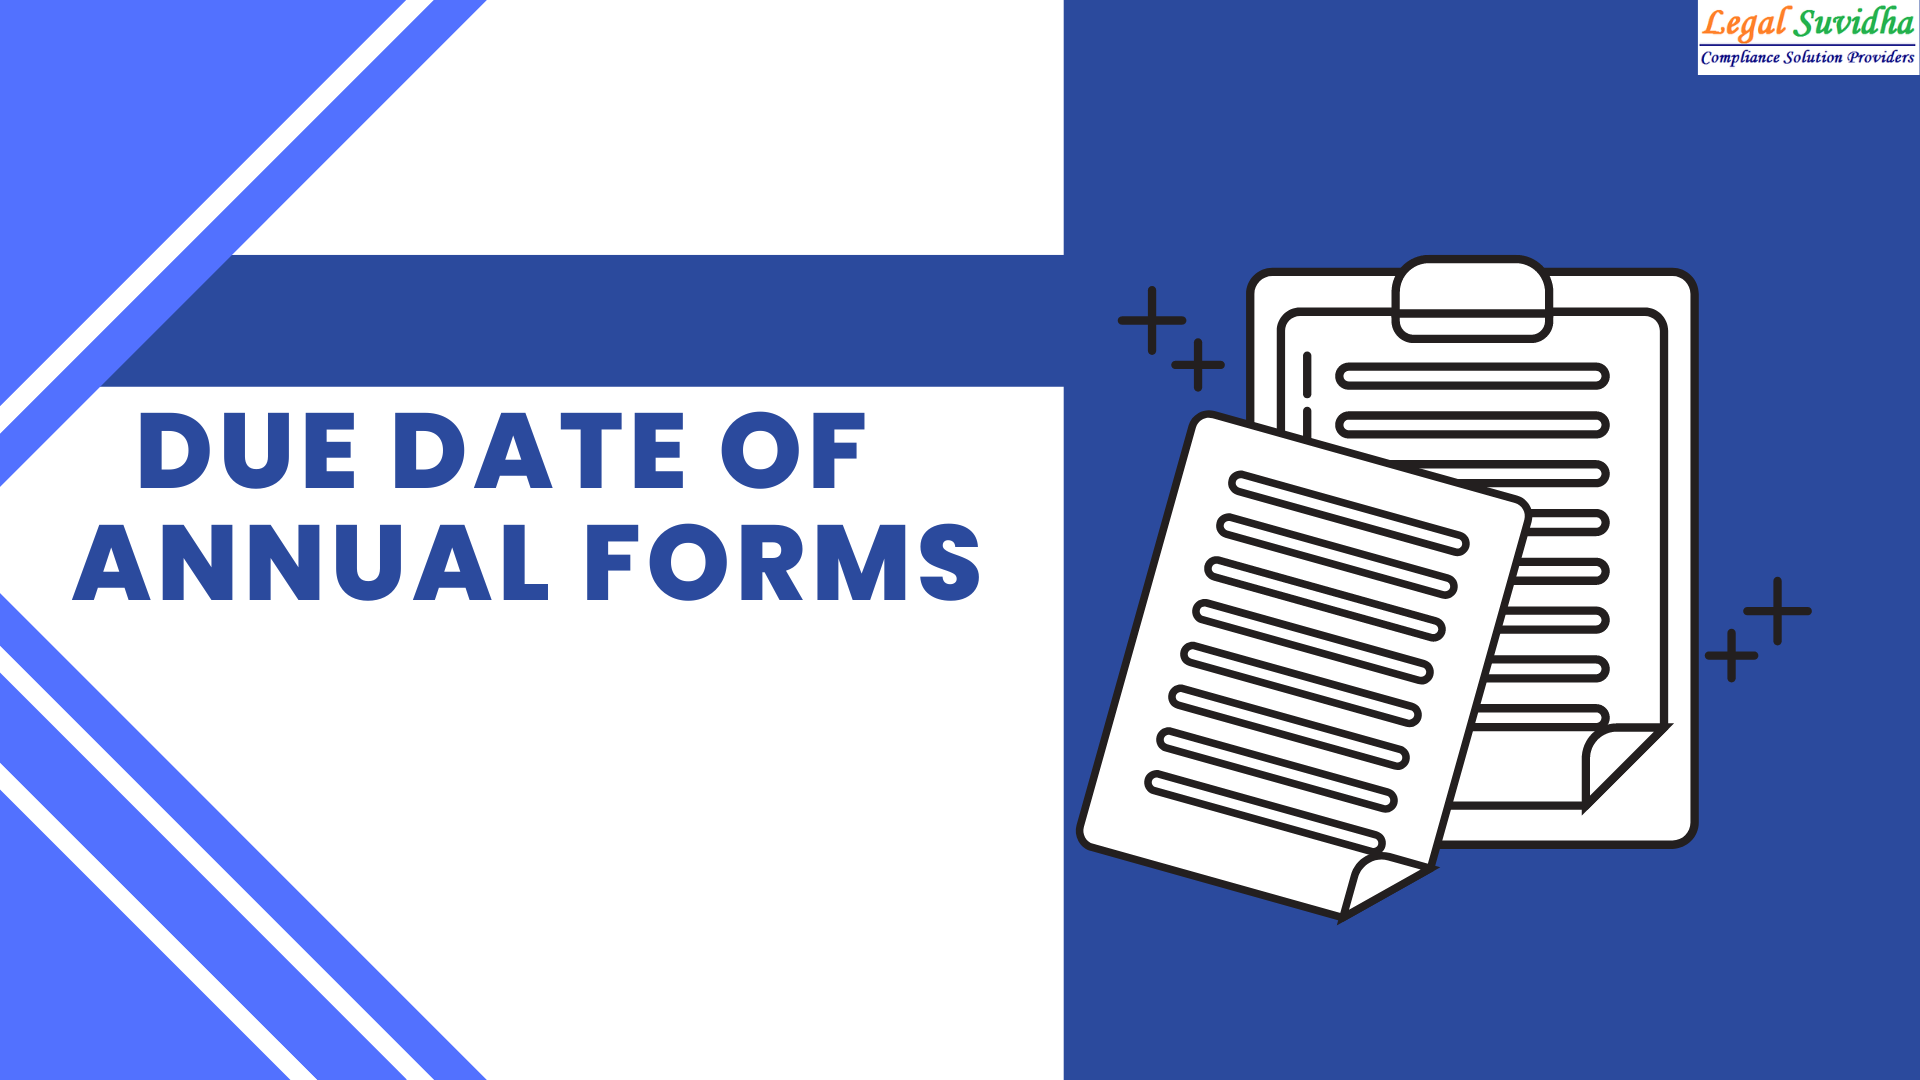 Due Date of Annual Forms